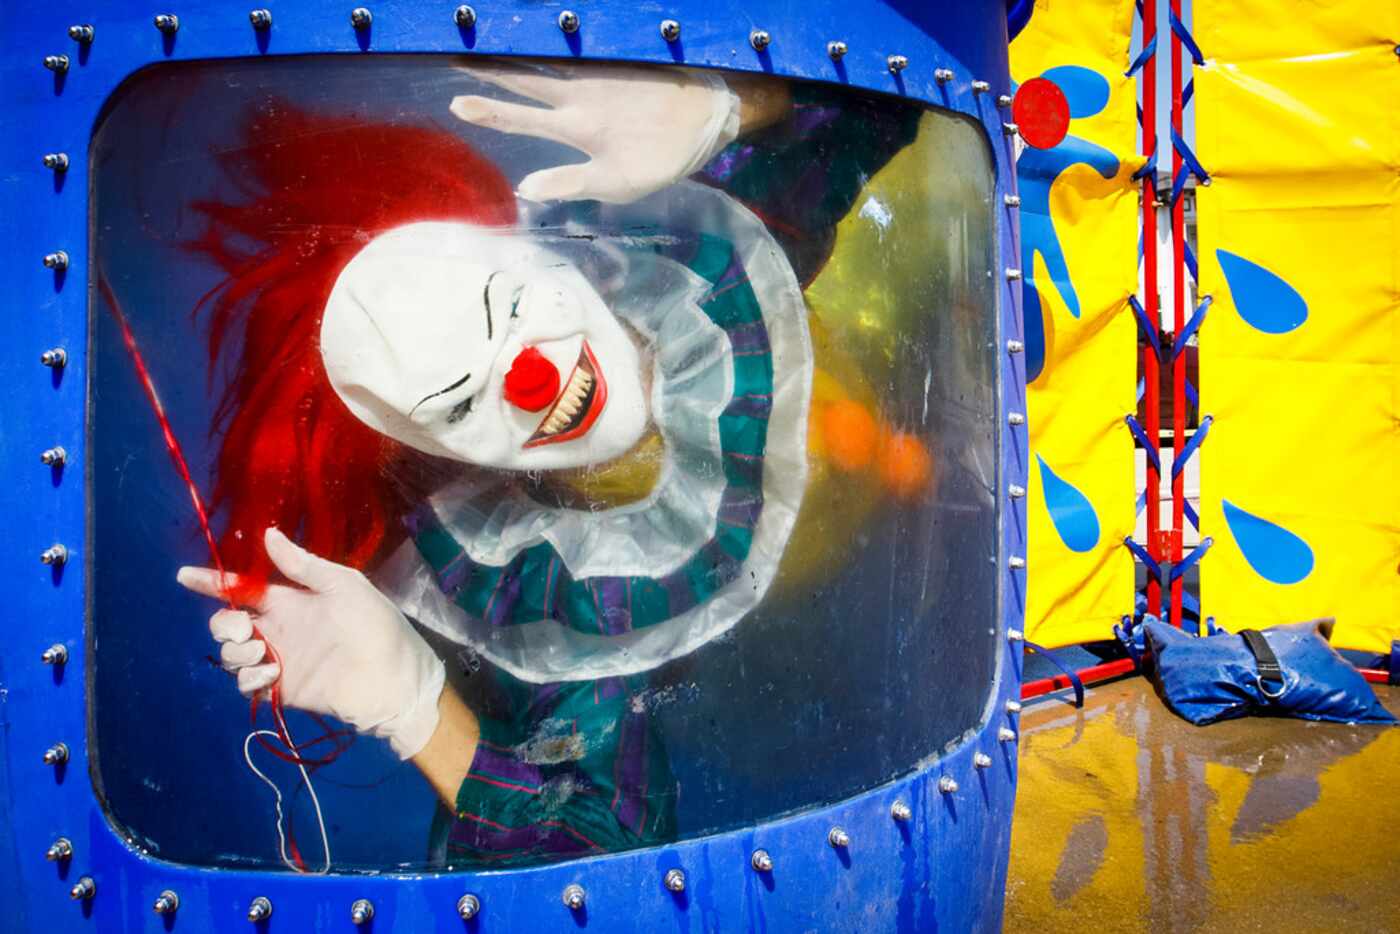 Wearing a clown costume, Cornea Associates Dr. Tyrone McCall peers out from under the water...